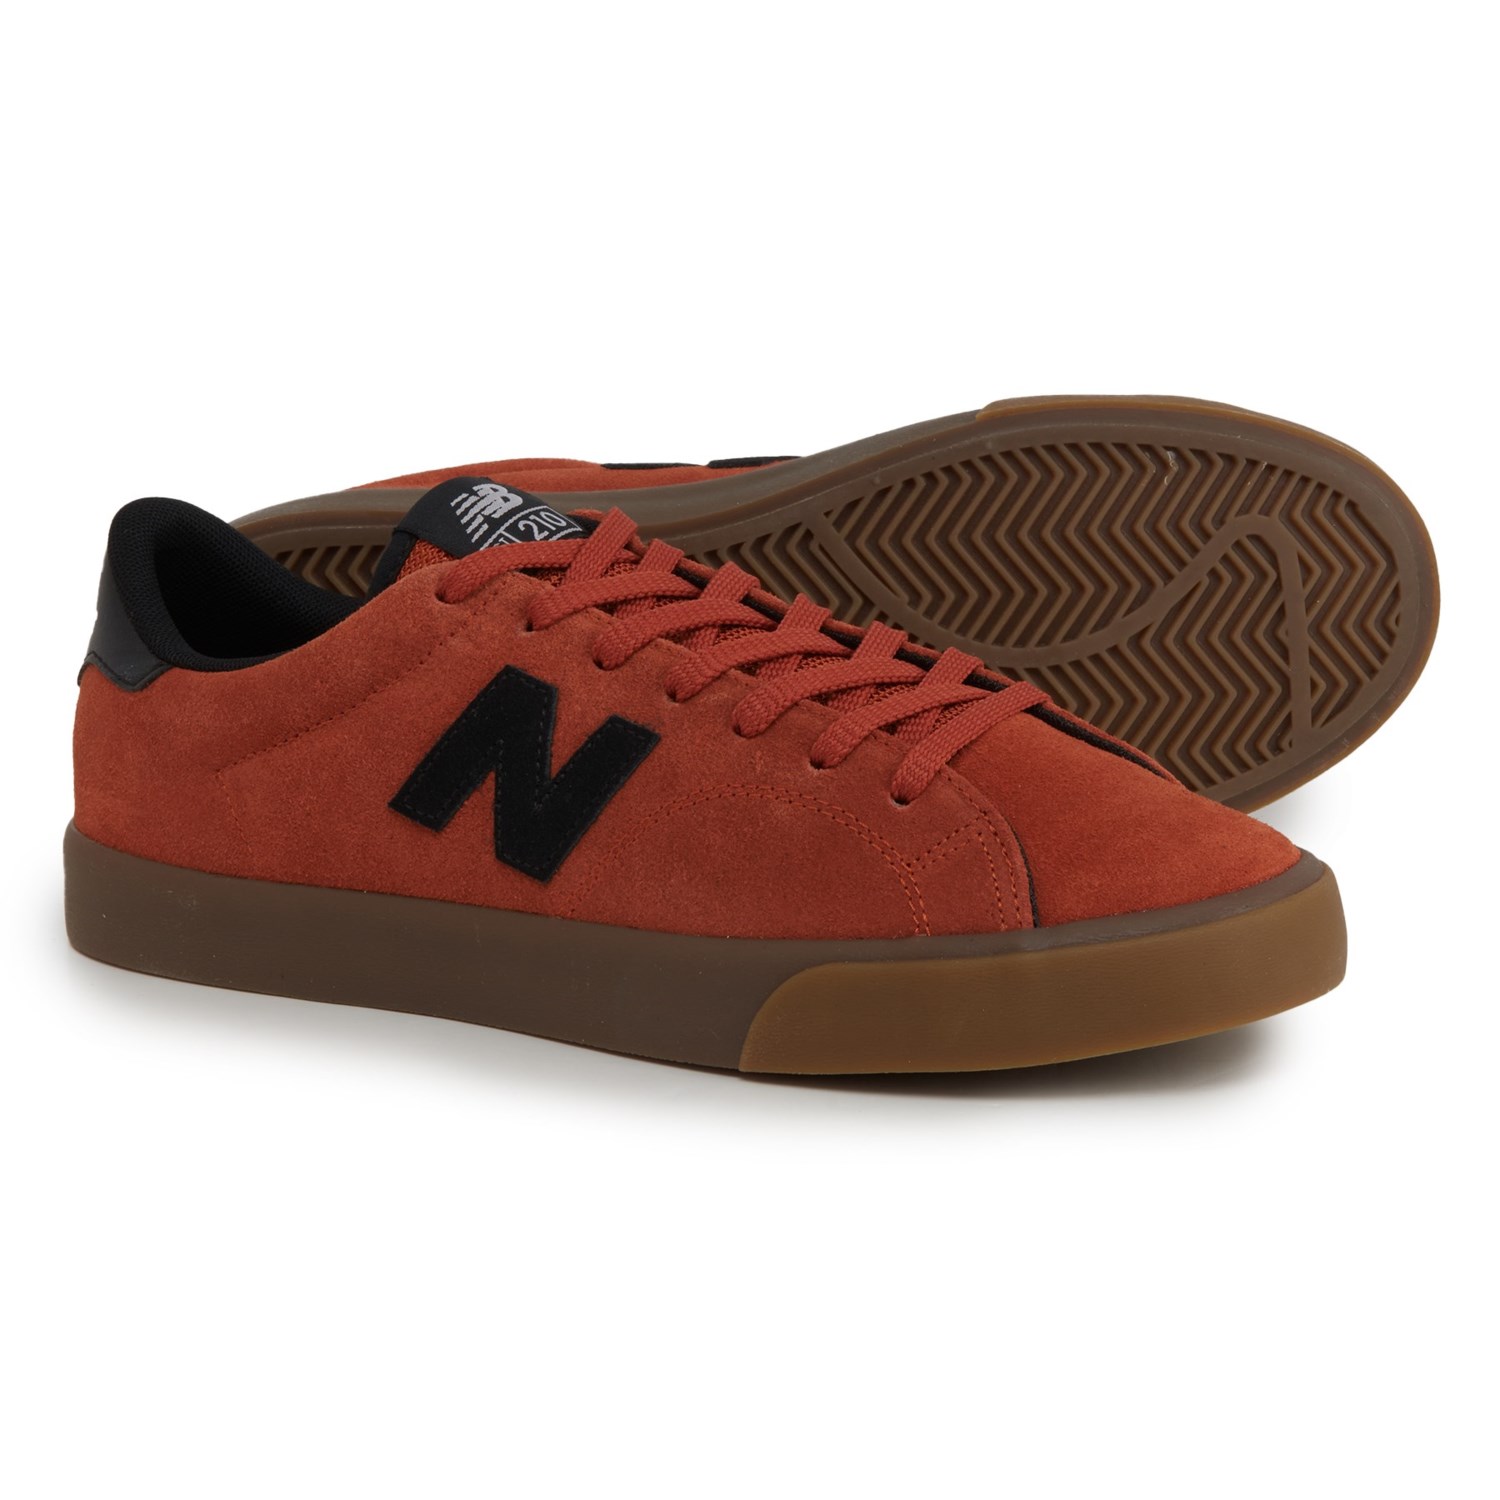 New Balance CT210 Sneakers - Suede (For Men)